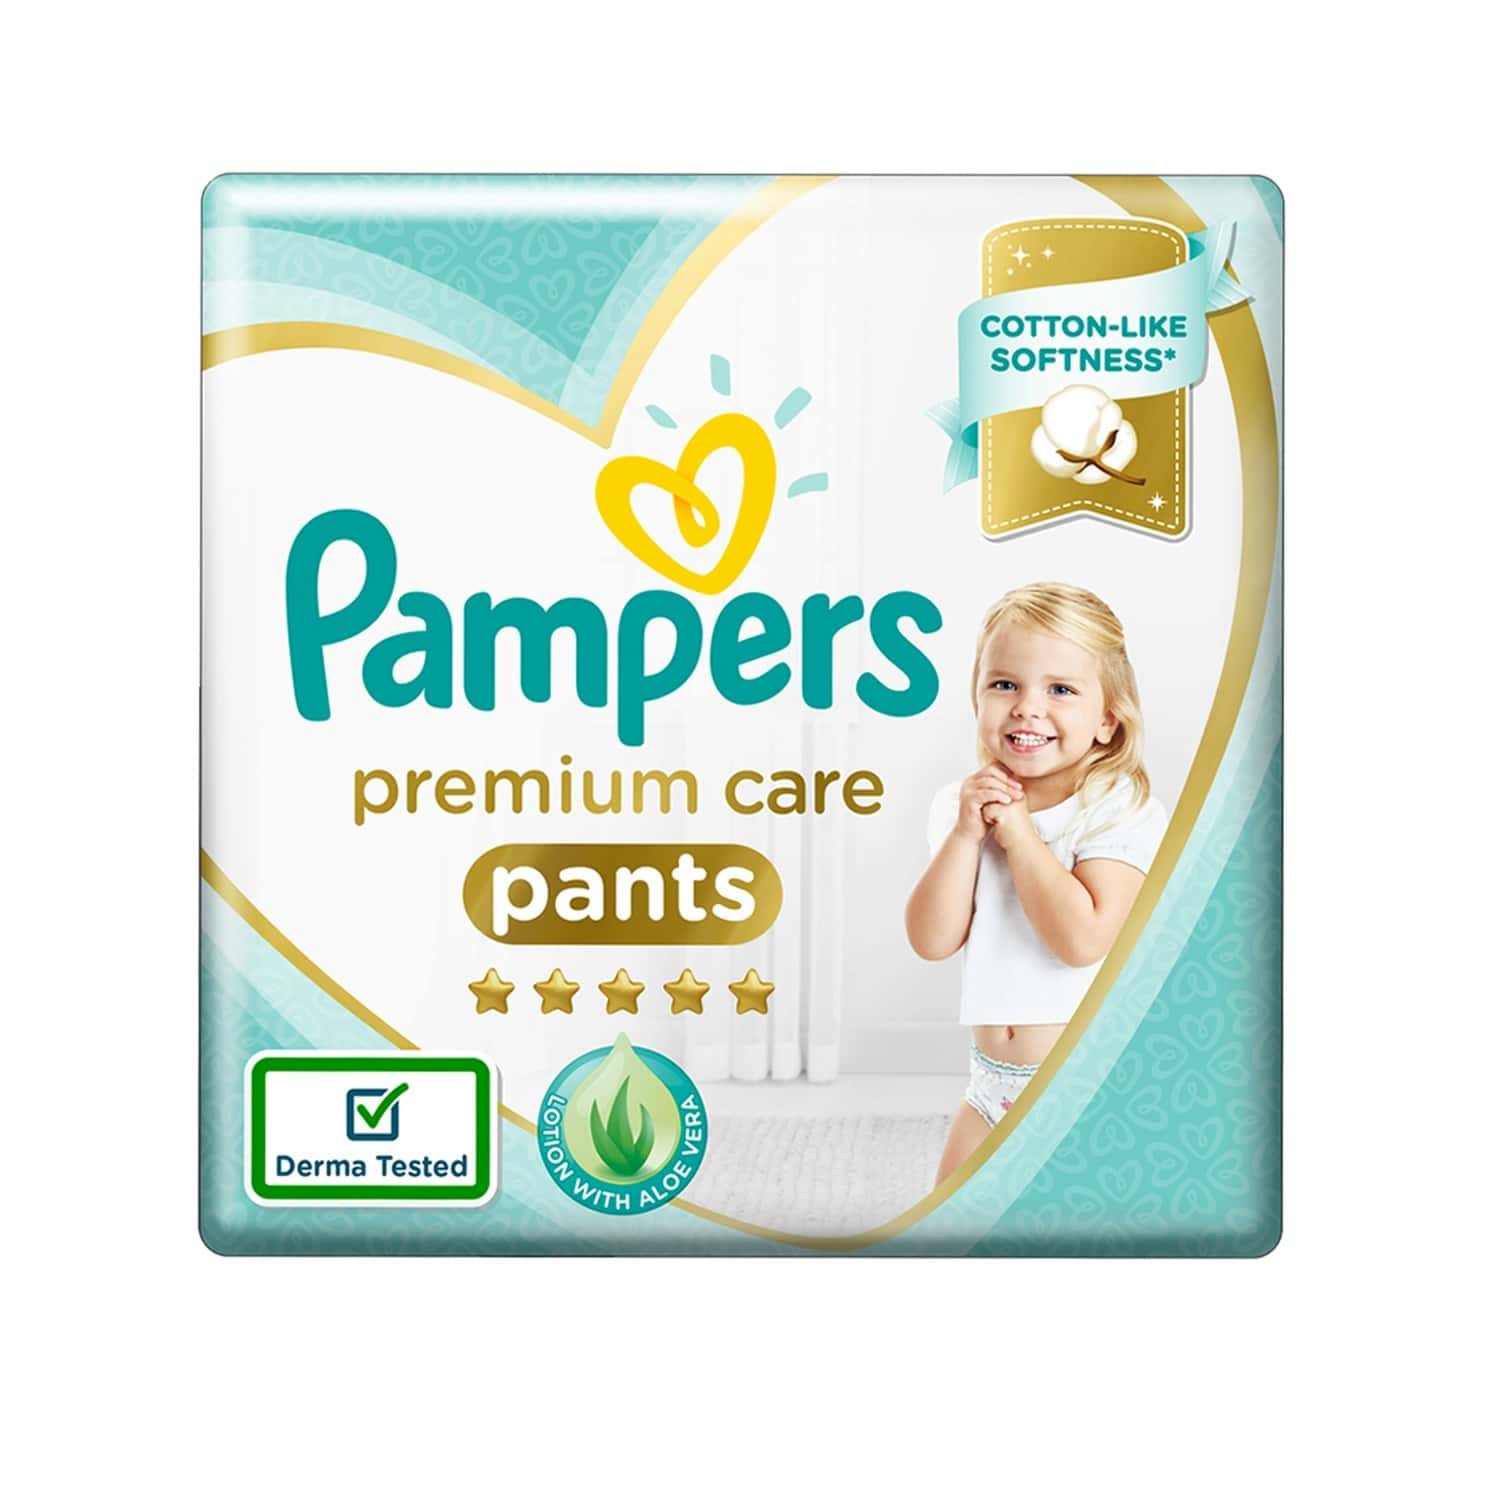 Baby :: Diapering :: Baby Diapers :: Pampers Premium Care Pants Double  Extra Large size baby diapers (XXL) 30 Count & Active Baby Taped Diapers  Extra Large size diapers (XL) 32 count Taped style custom fit